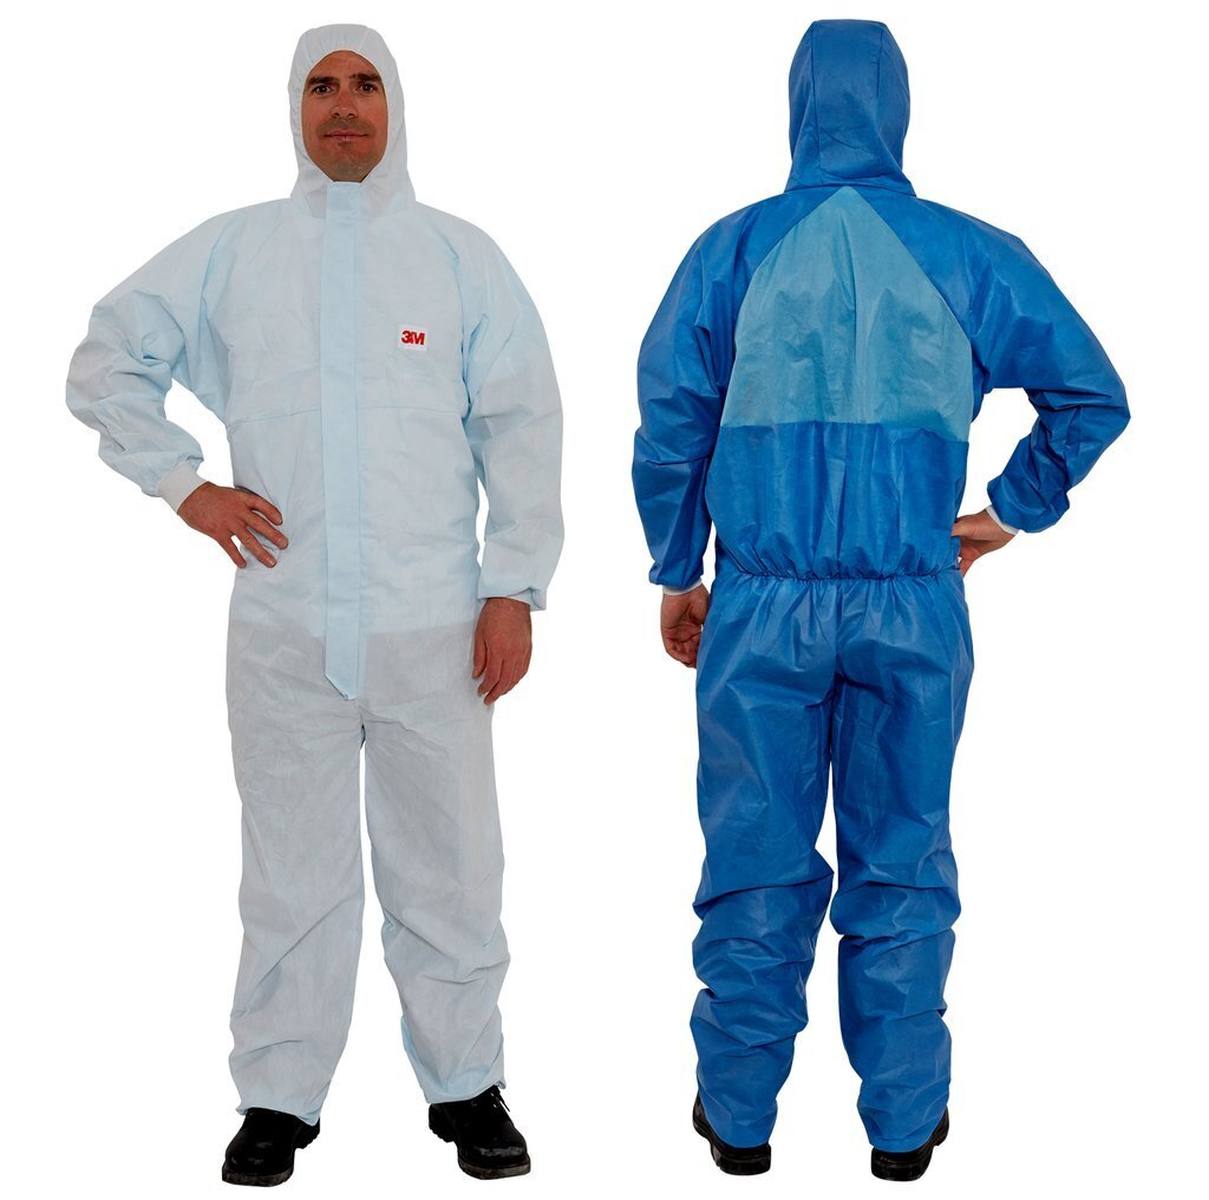 3M 4532 B coverall, blue, TYPE 5/6, size XL, material SSMMS low-linting, breathable, detachable zipper, knitted cuffs